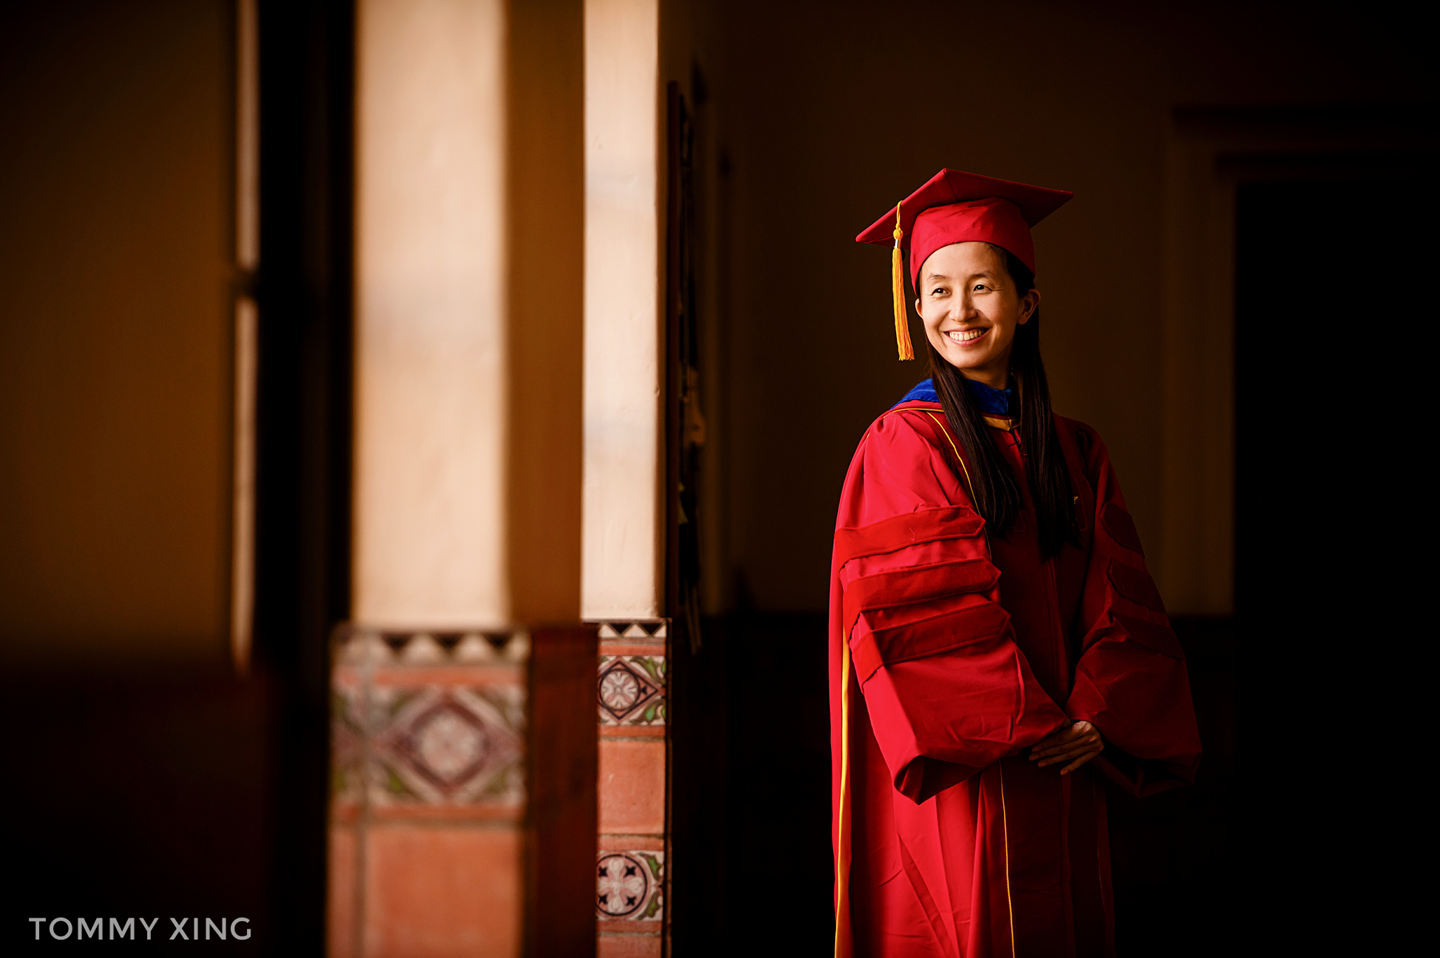 Graduation portrait photography - USC - Los Angeles - Tommy Xing Photography 01.jpg